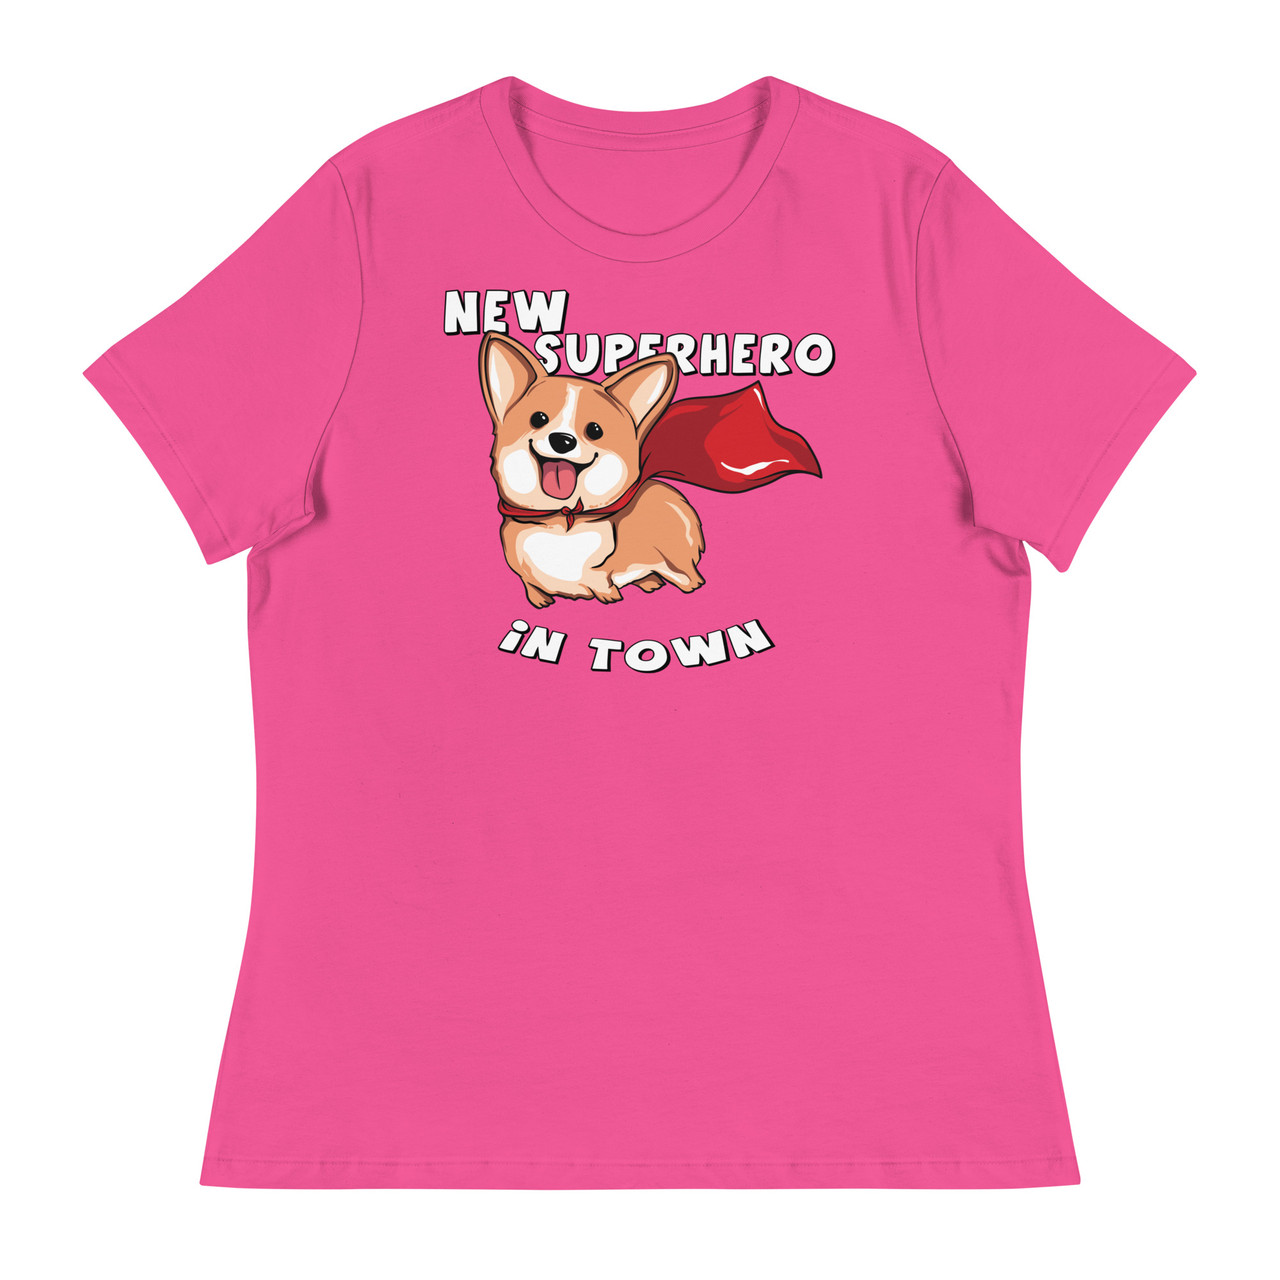 New Super Hero In Town Women's Relaxed T-Shirt - Bella + Canvas 6400